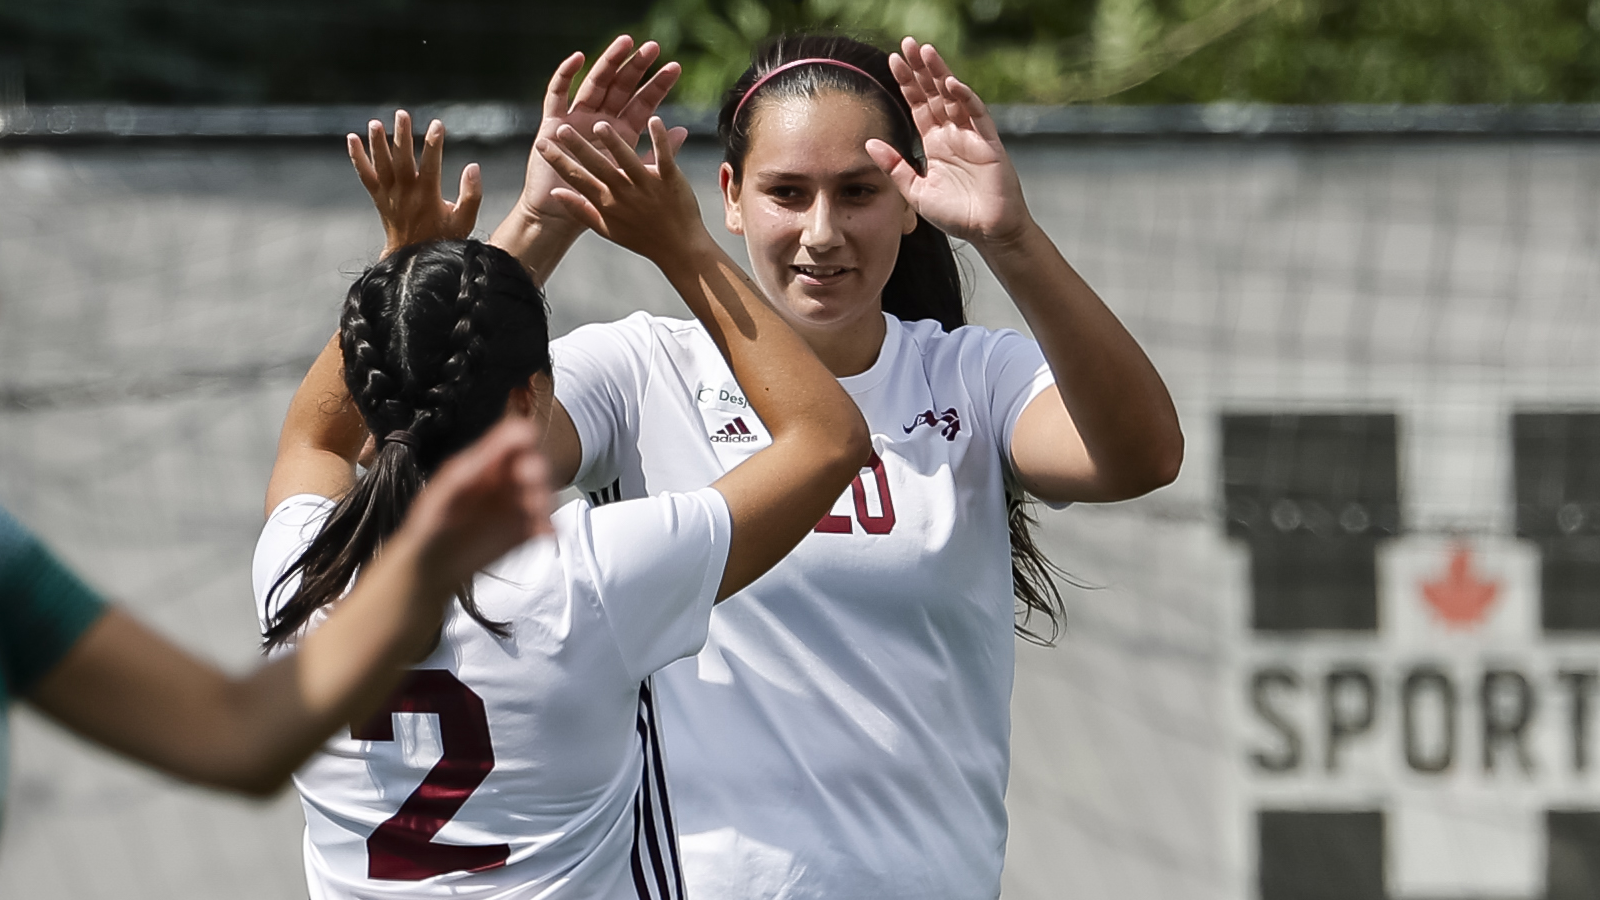 Action photo of Ottawa women's soccer player Cassandra Provost high fiving her teammate on the field